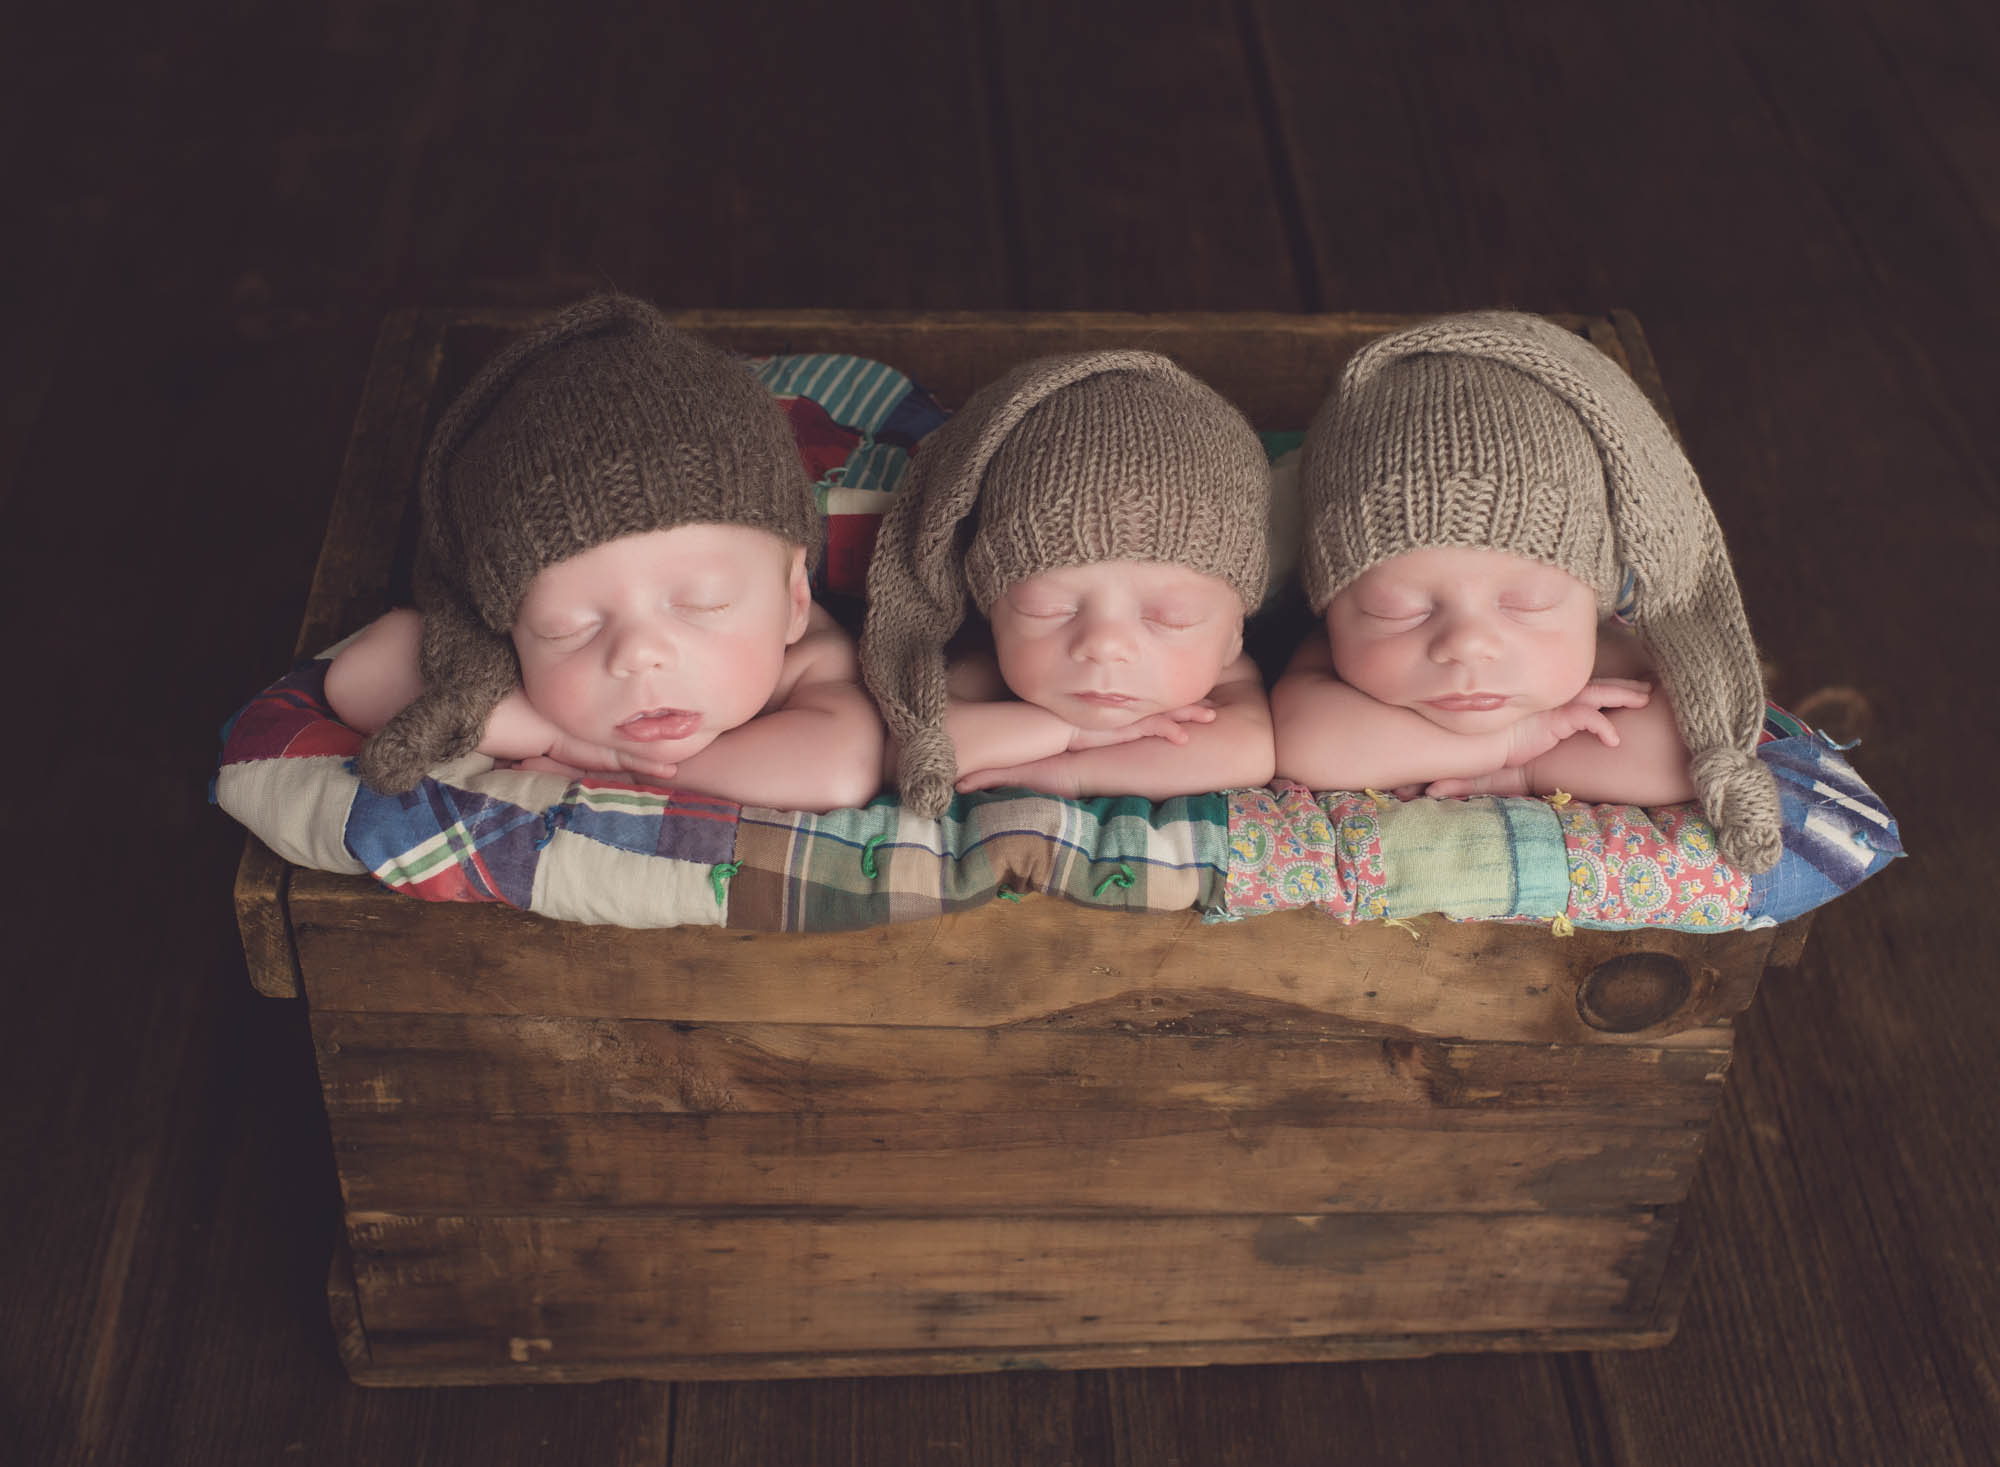 3 new baby boys posed in crate with chin on hands wearing sleepy caps Connecticut Newborn Photographer